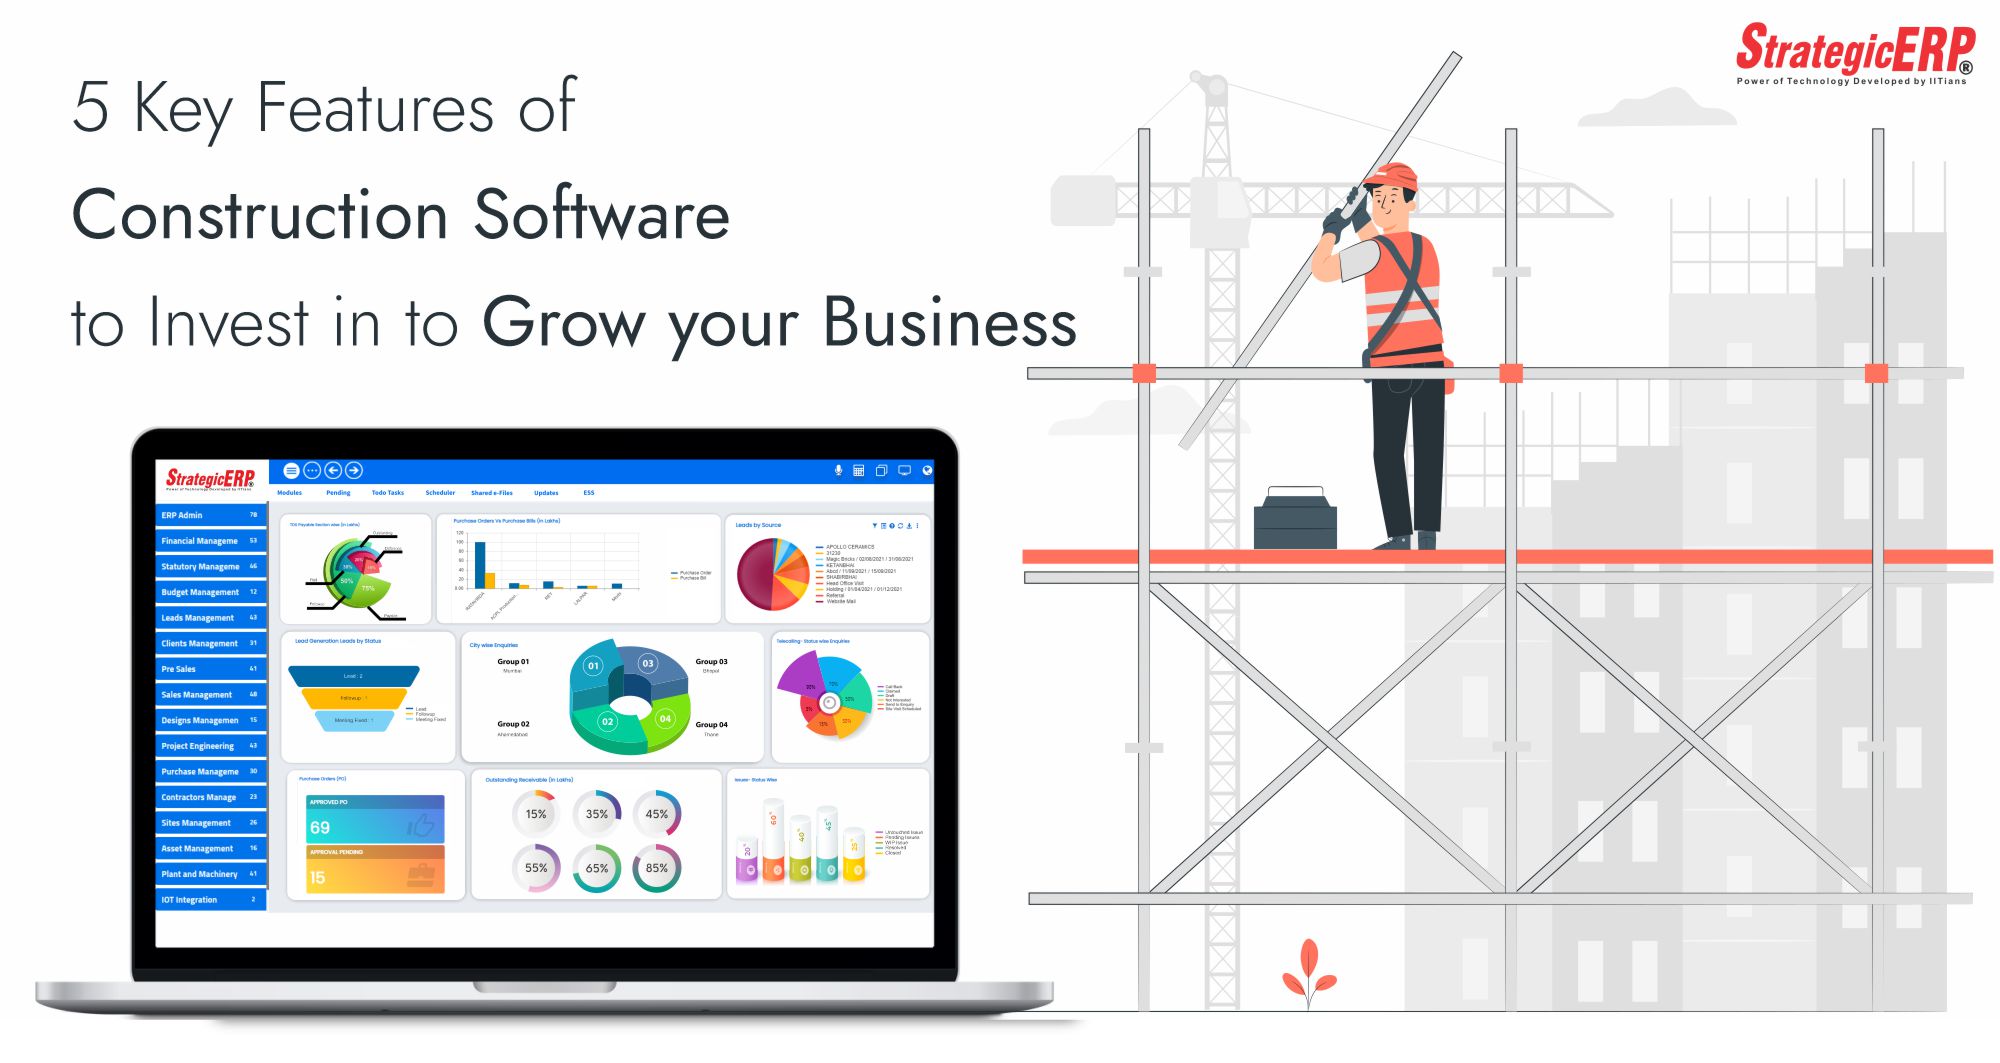 5 Key Features of Construction Software to Invest in to Grow your Business